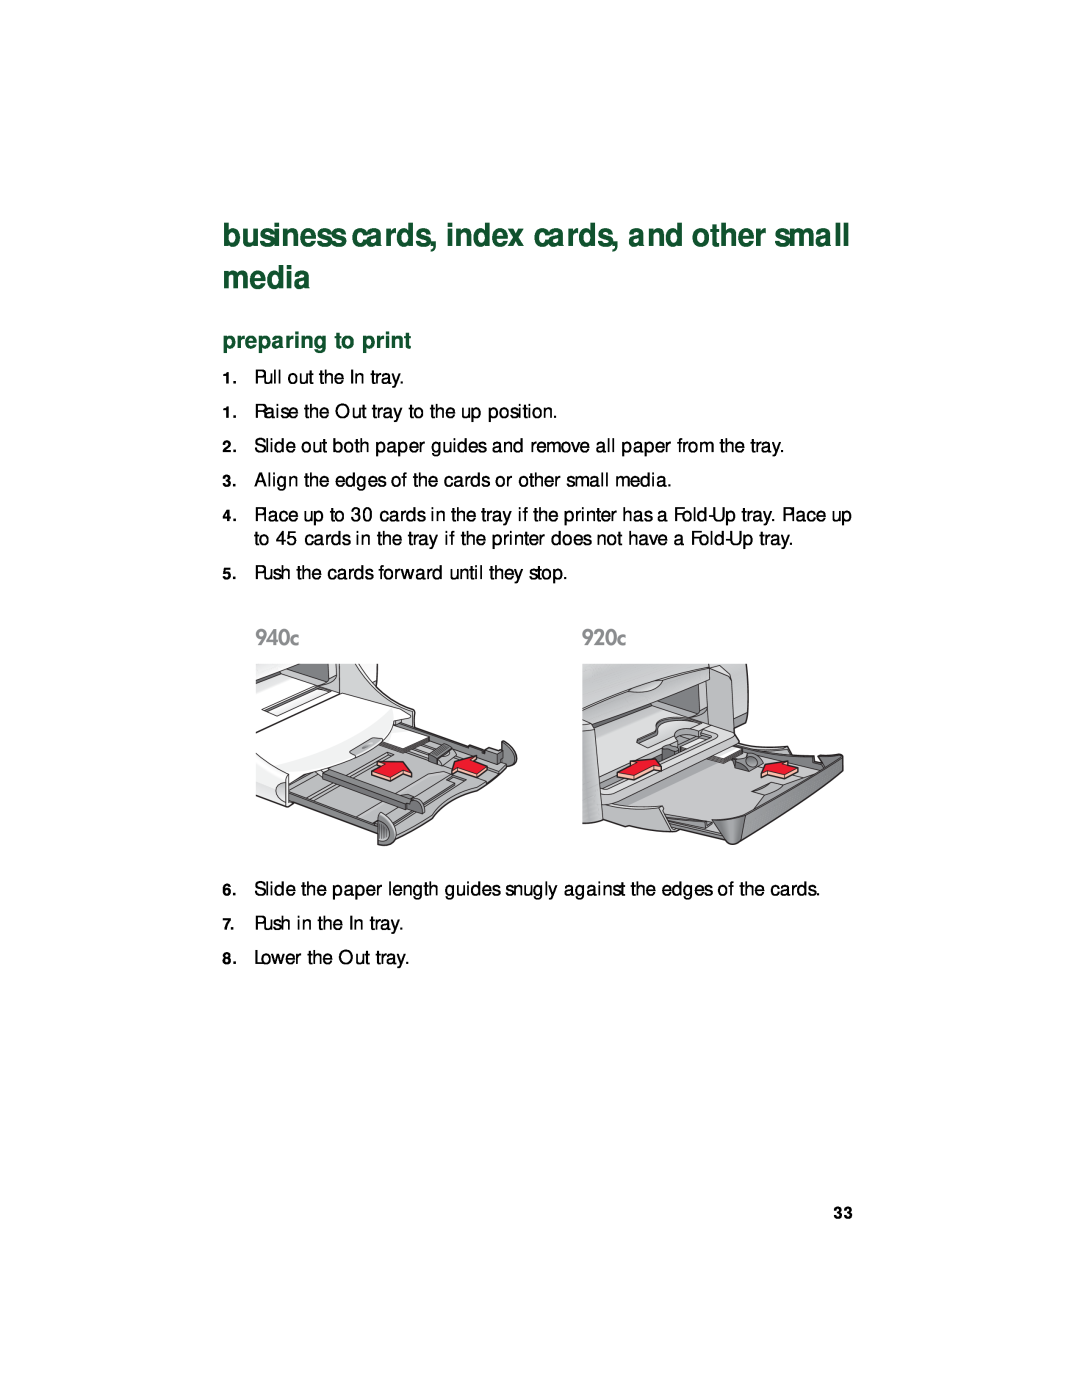 HP 940c, 920c, 948c manual business cards, index cards, and other small media, preparing to print 